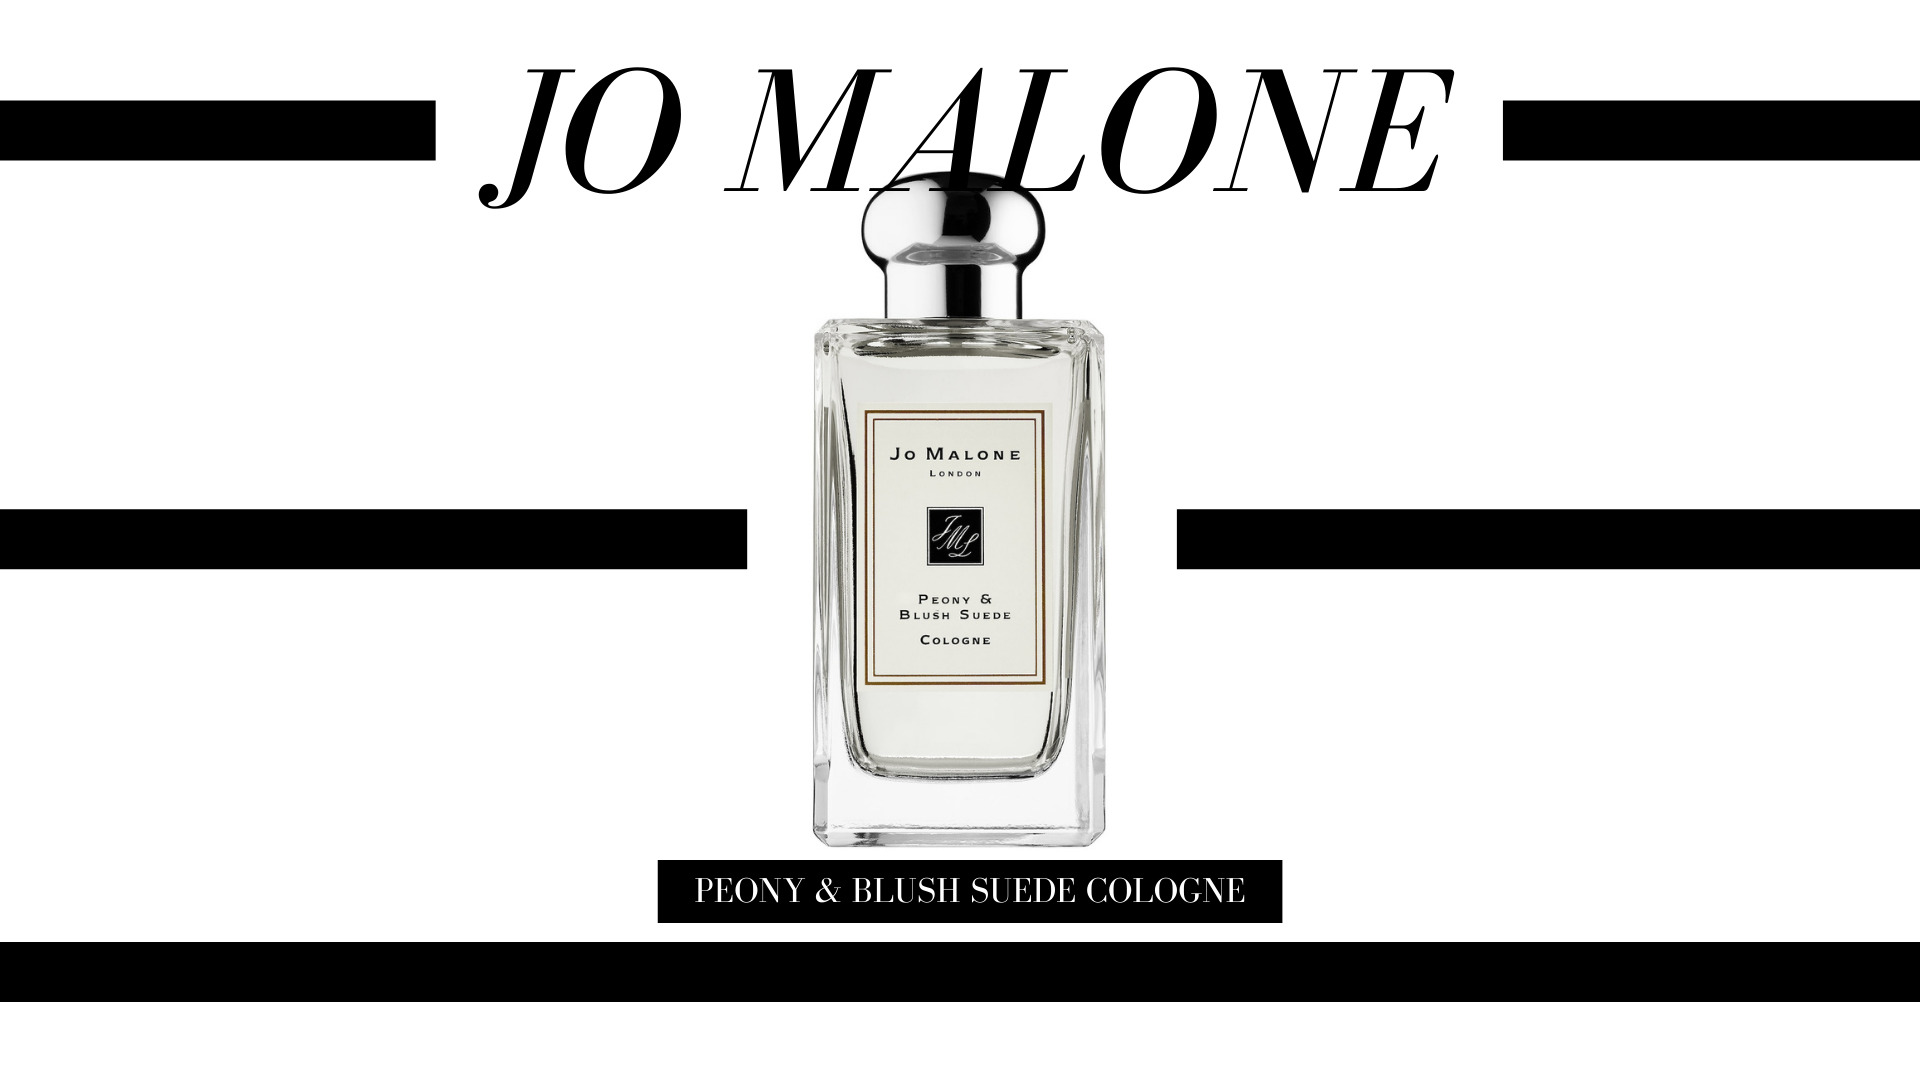 Jo Malone is a brand well known for its luxurious scents! This Peony & Blush Suede Cologne is to die for! This floral fragrance has peon, suede, and red apple for a fresh and juicy finish.